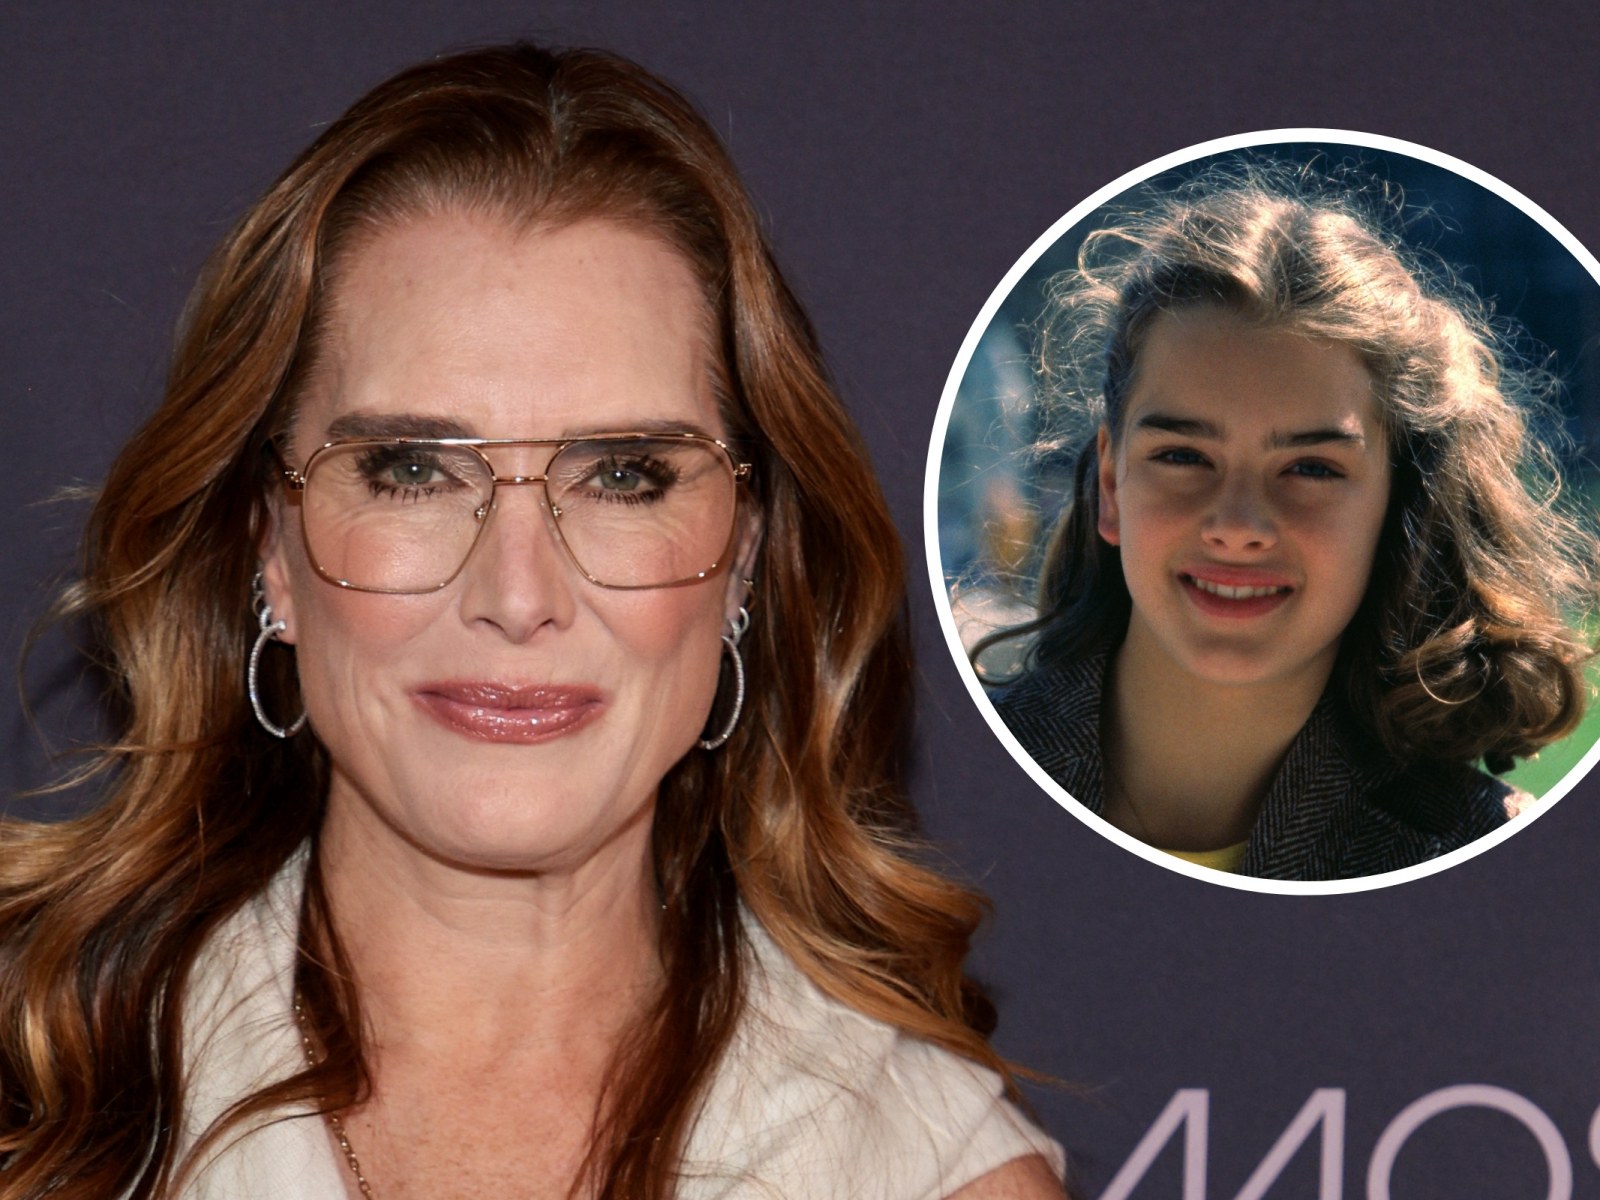 Resurfaced 1978 Article Sexualizing Brooke Shields, 12, Sparks Outrage